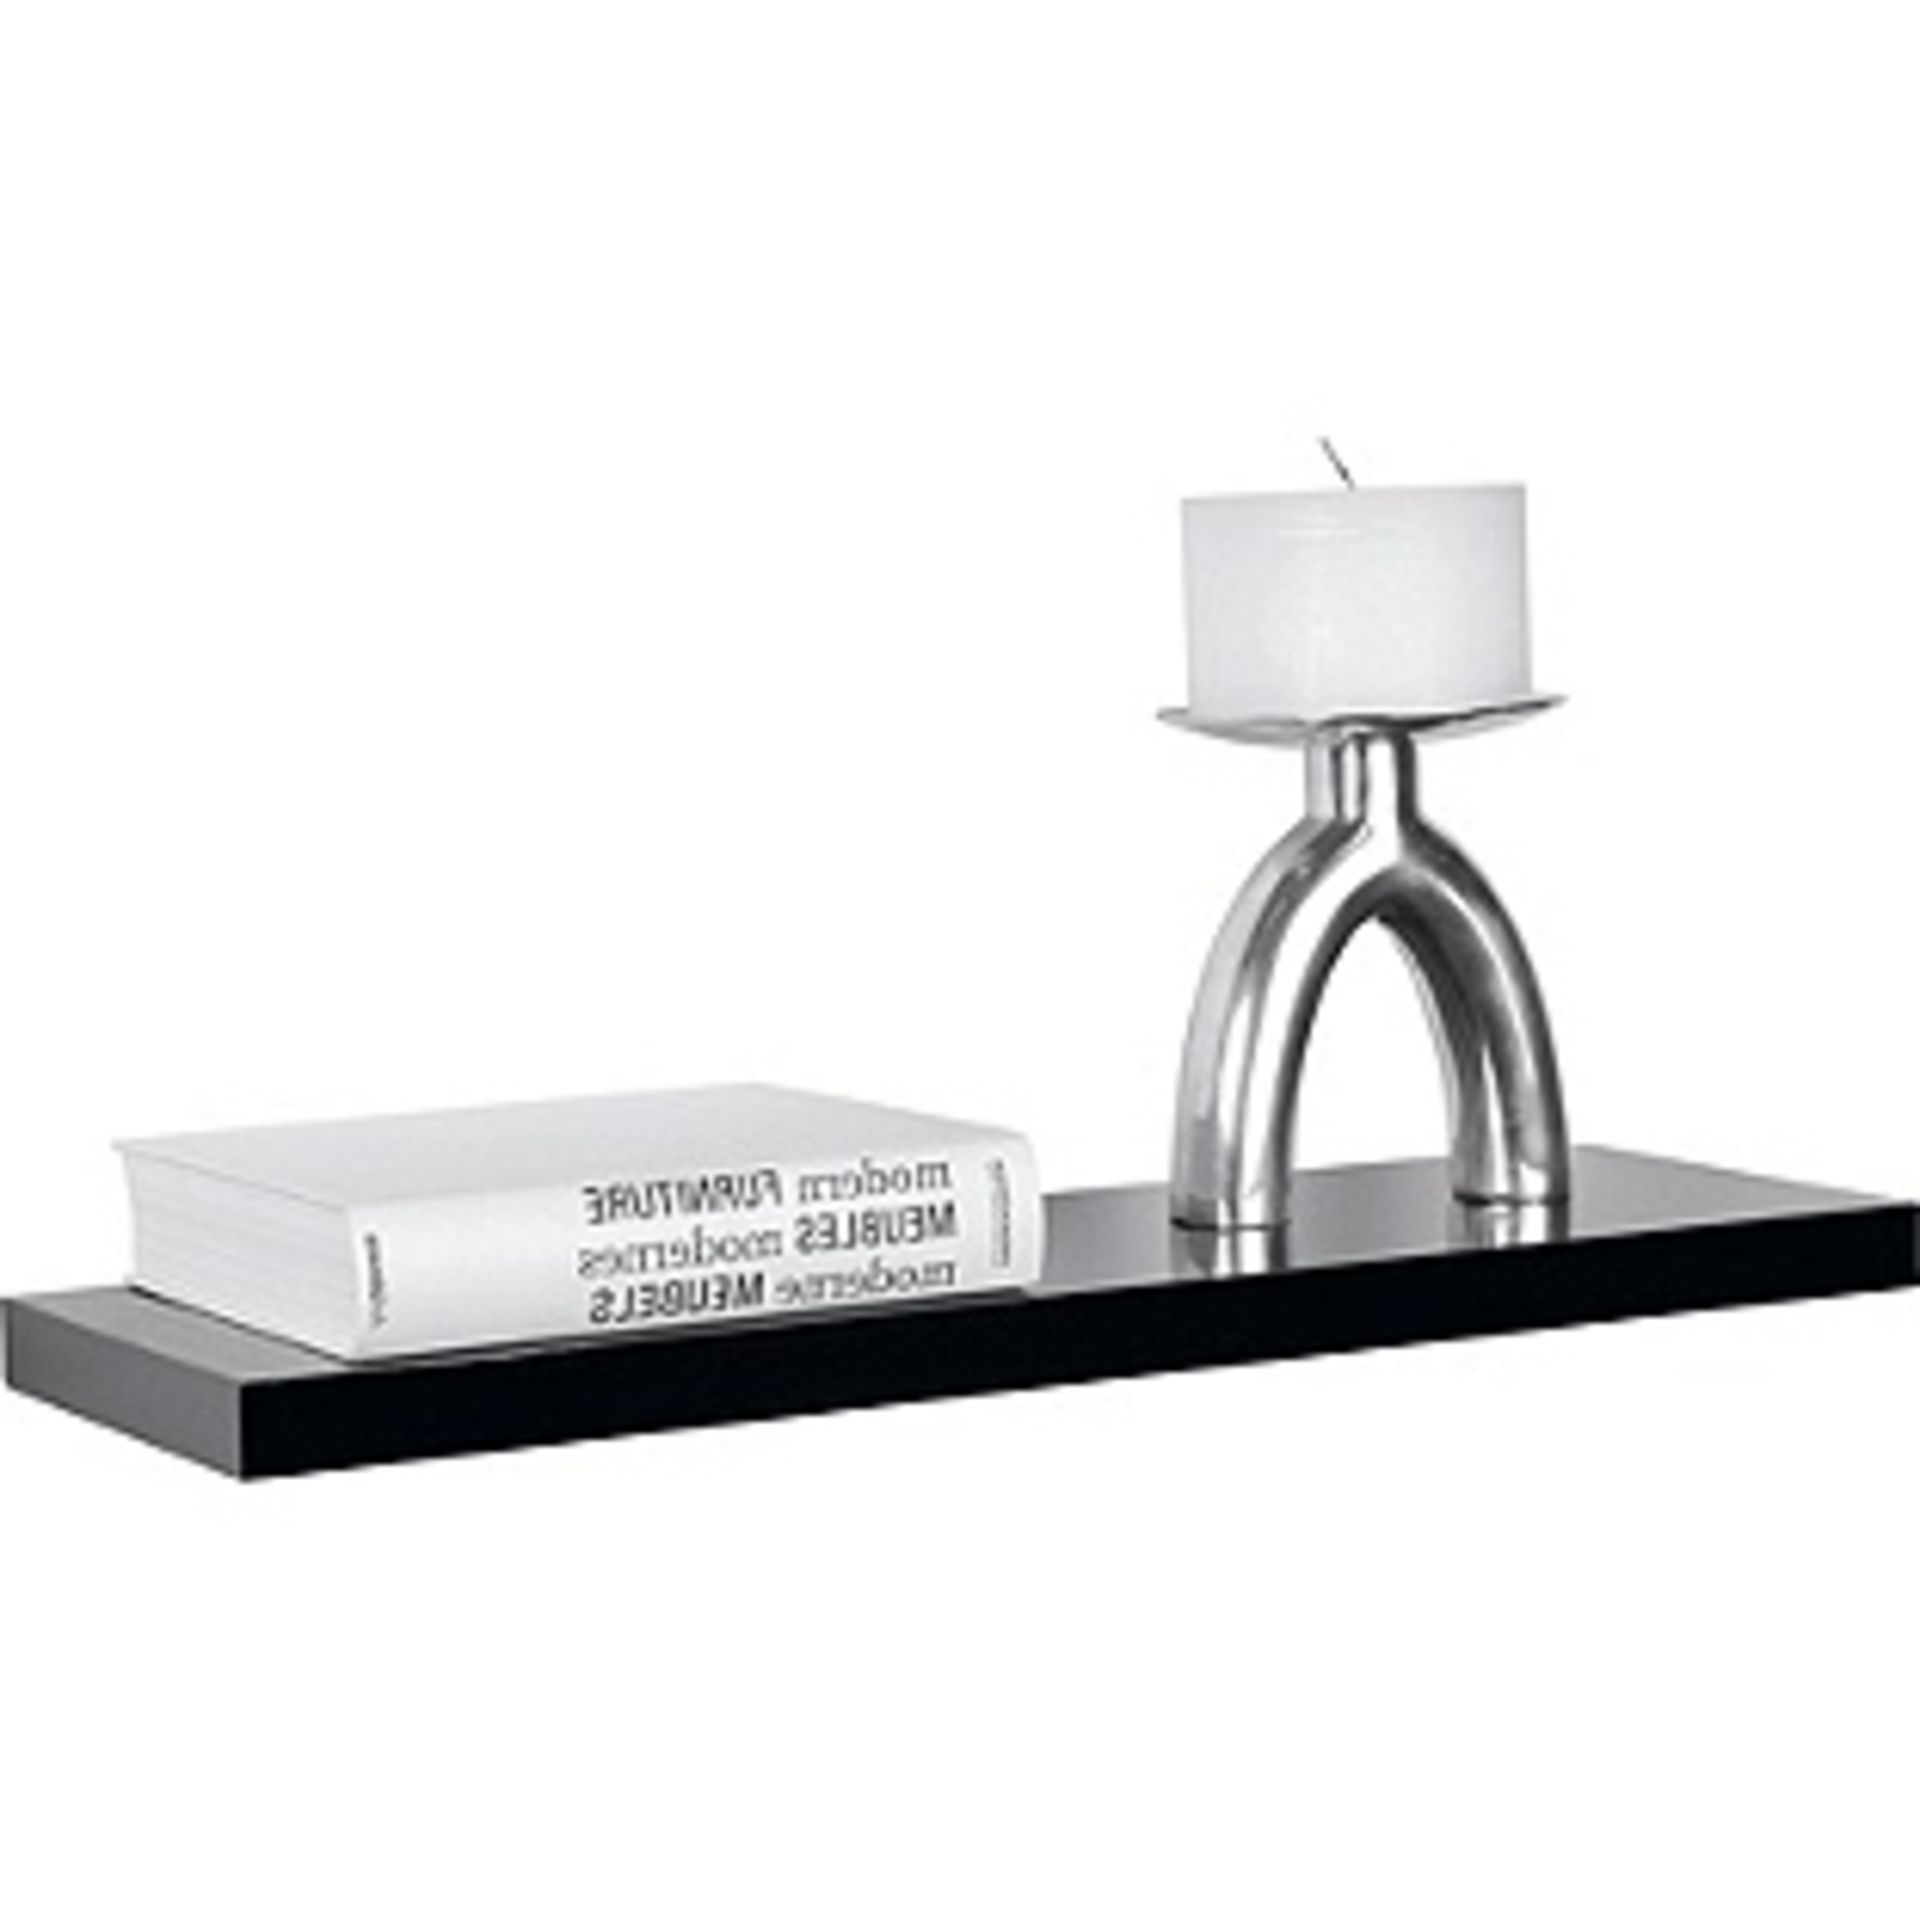 Collection High Gloss 60cm Floating Shelf - Black. Boxed and Unchecked. Size H3.8, W60, D25cm.